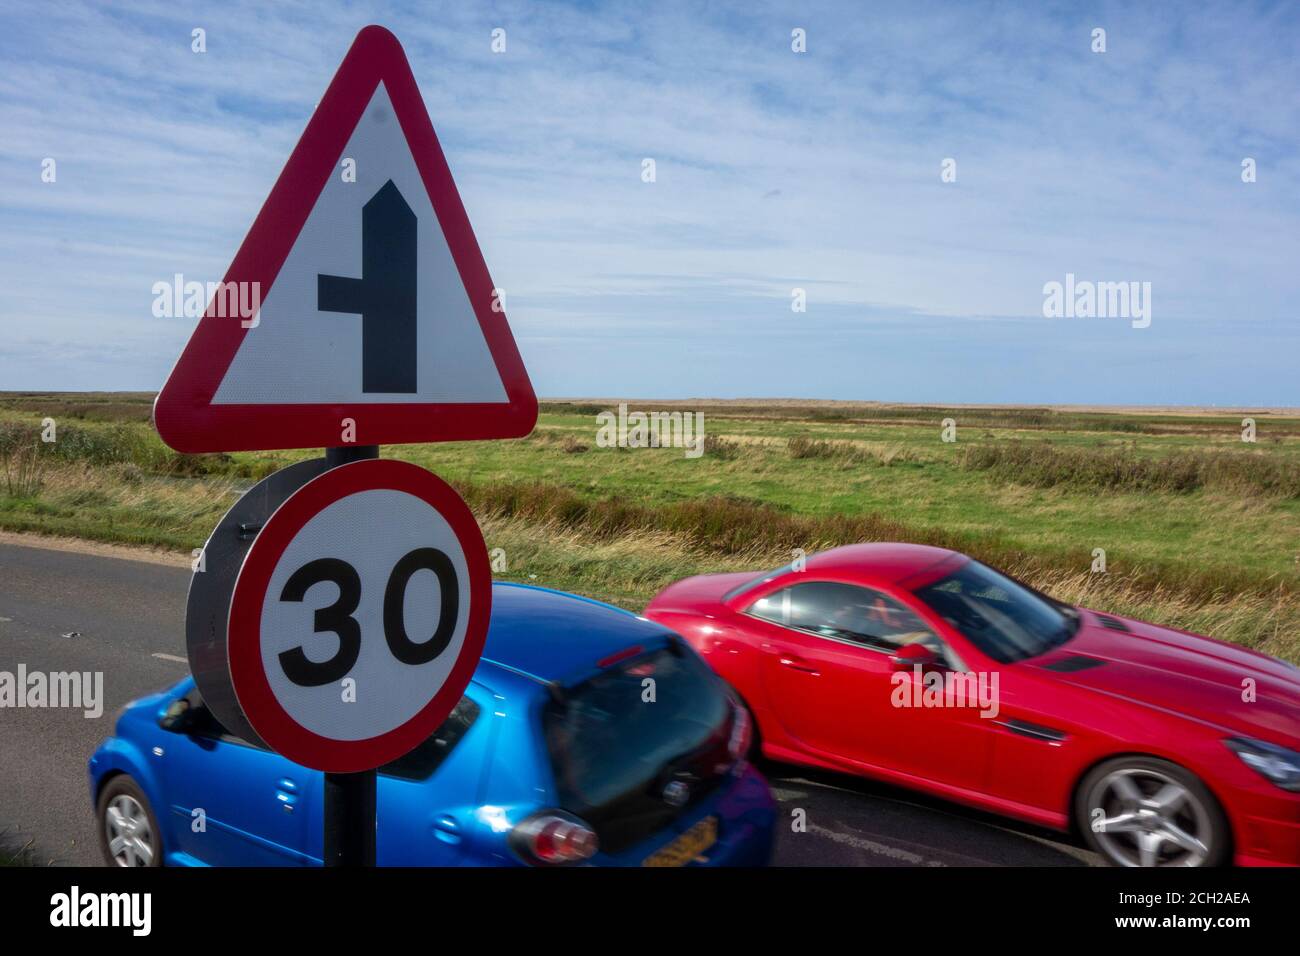 30 mph, speed sign, country road, Stock Photo